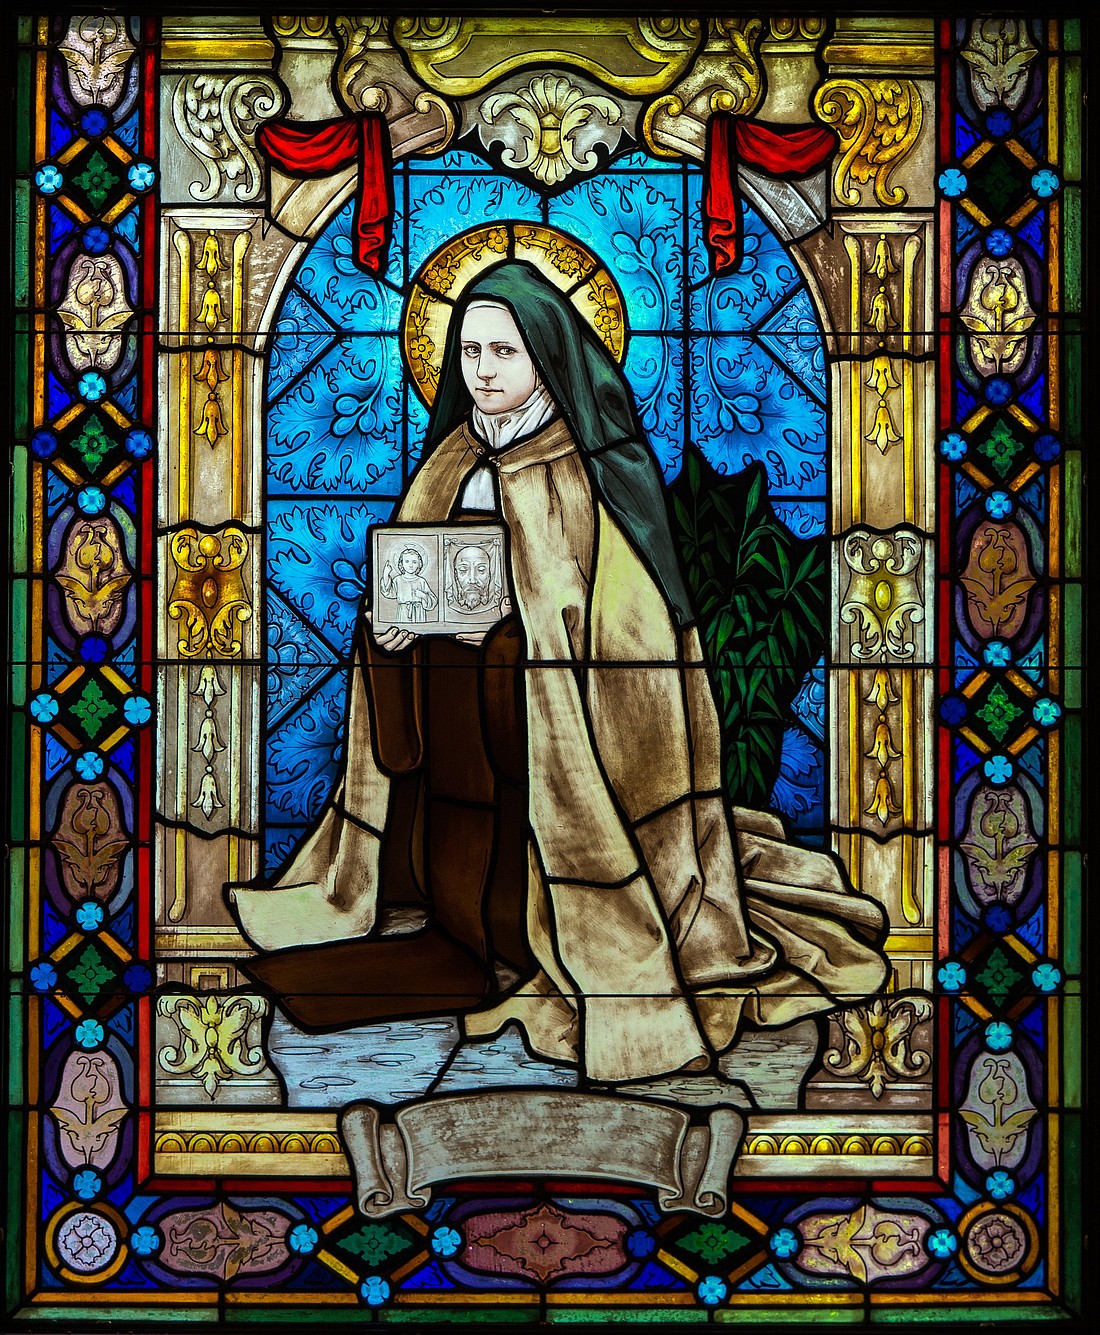 A stained glass window inside St. Thérèse Chapel at Holy Hill in Hubertus, Wis., depicts St. Therese with pictures of the child Jesus and the "holy face." The day she received the habit on Jan. 10, 1889, she signed her name for the first time as "Sister Thérèse of the Child Jesus and the Holy Face." (OSV News photo/Sam Lucero).